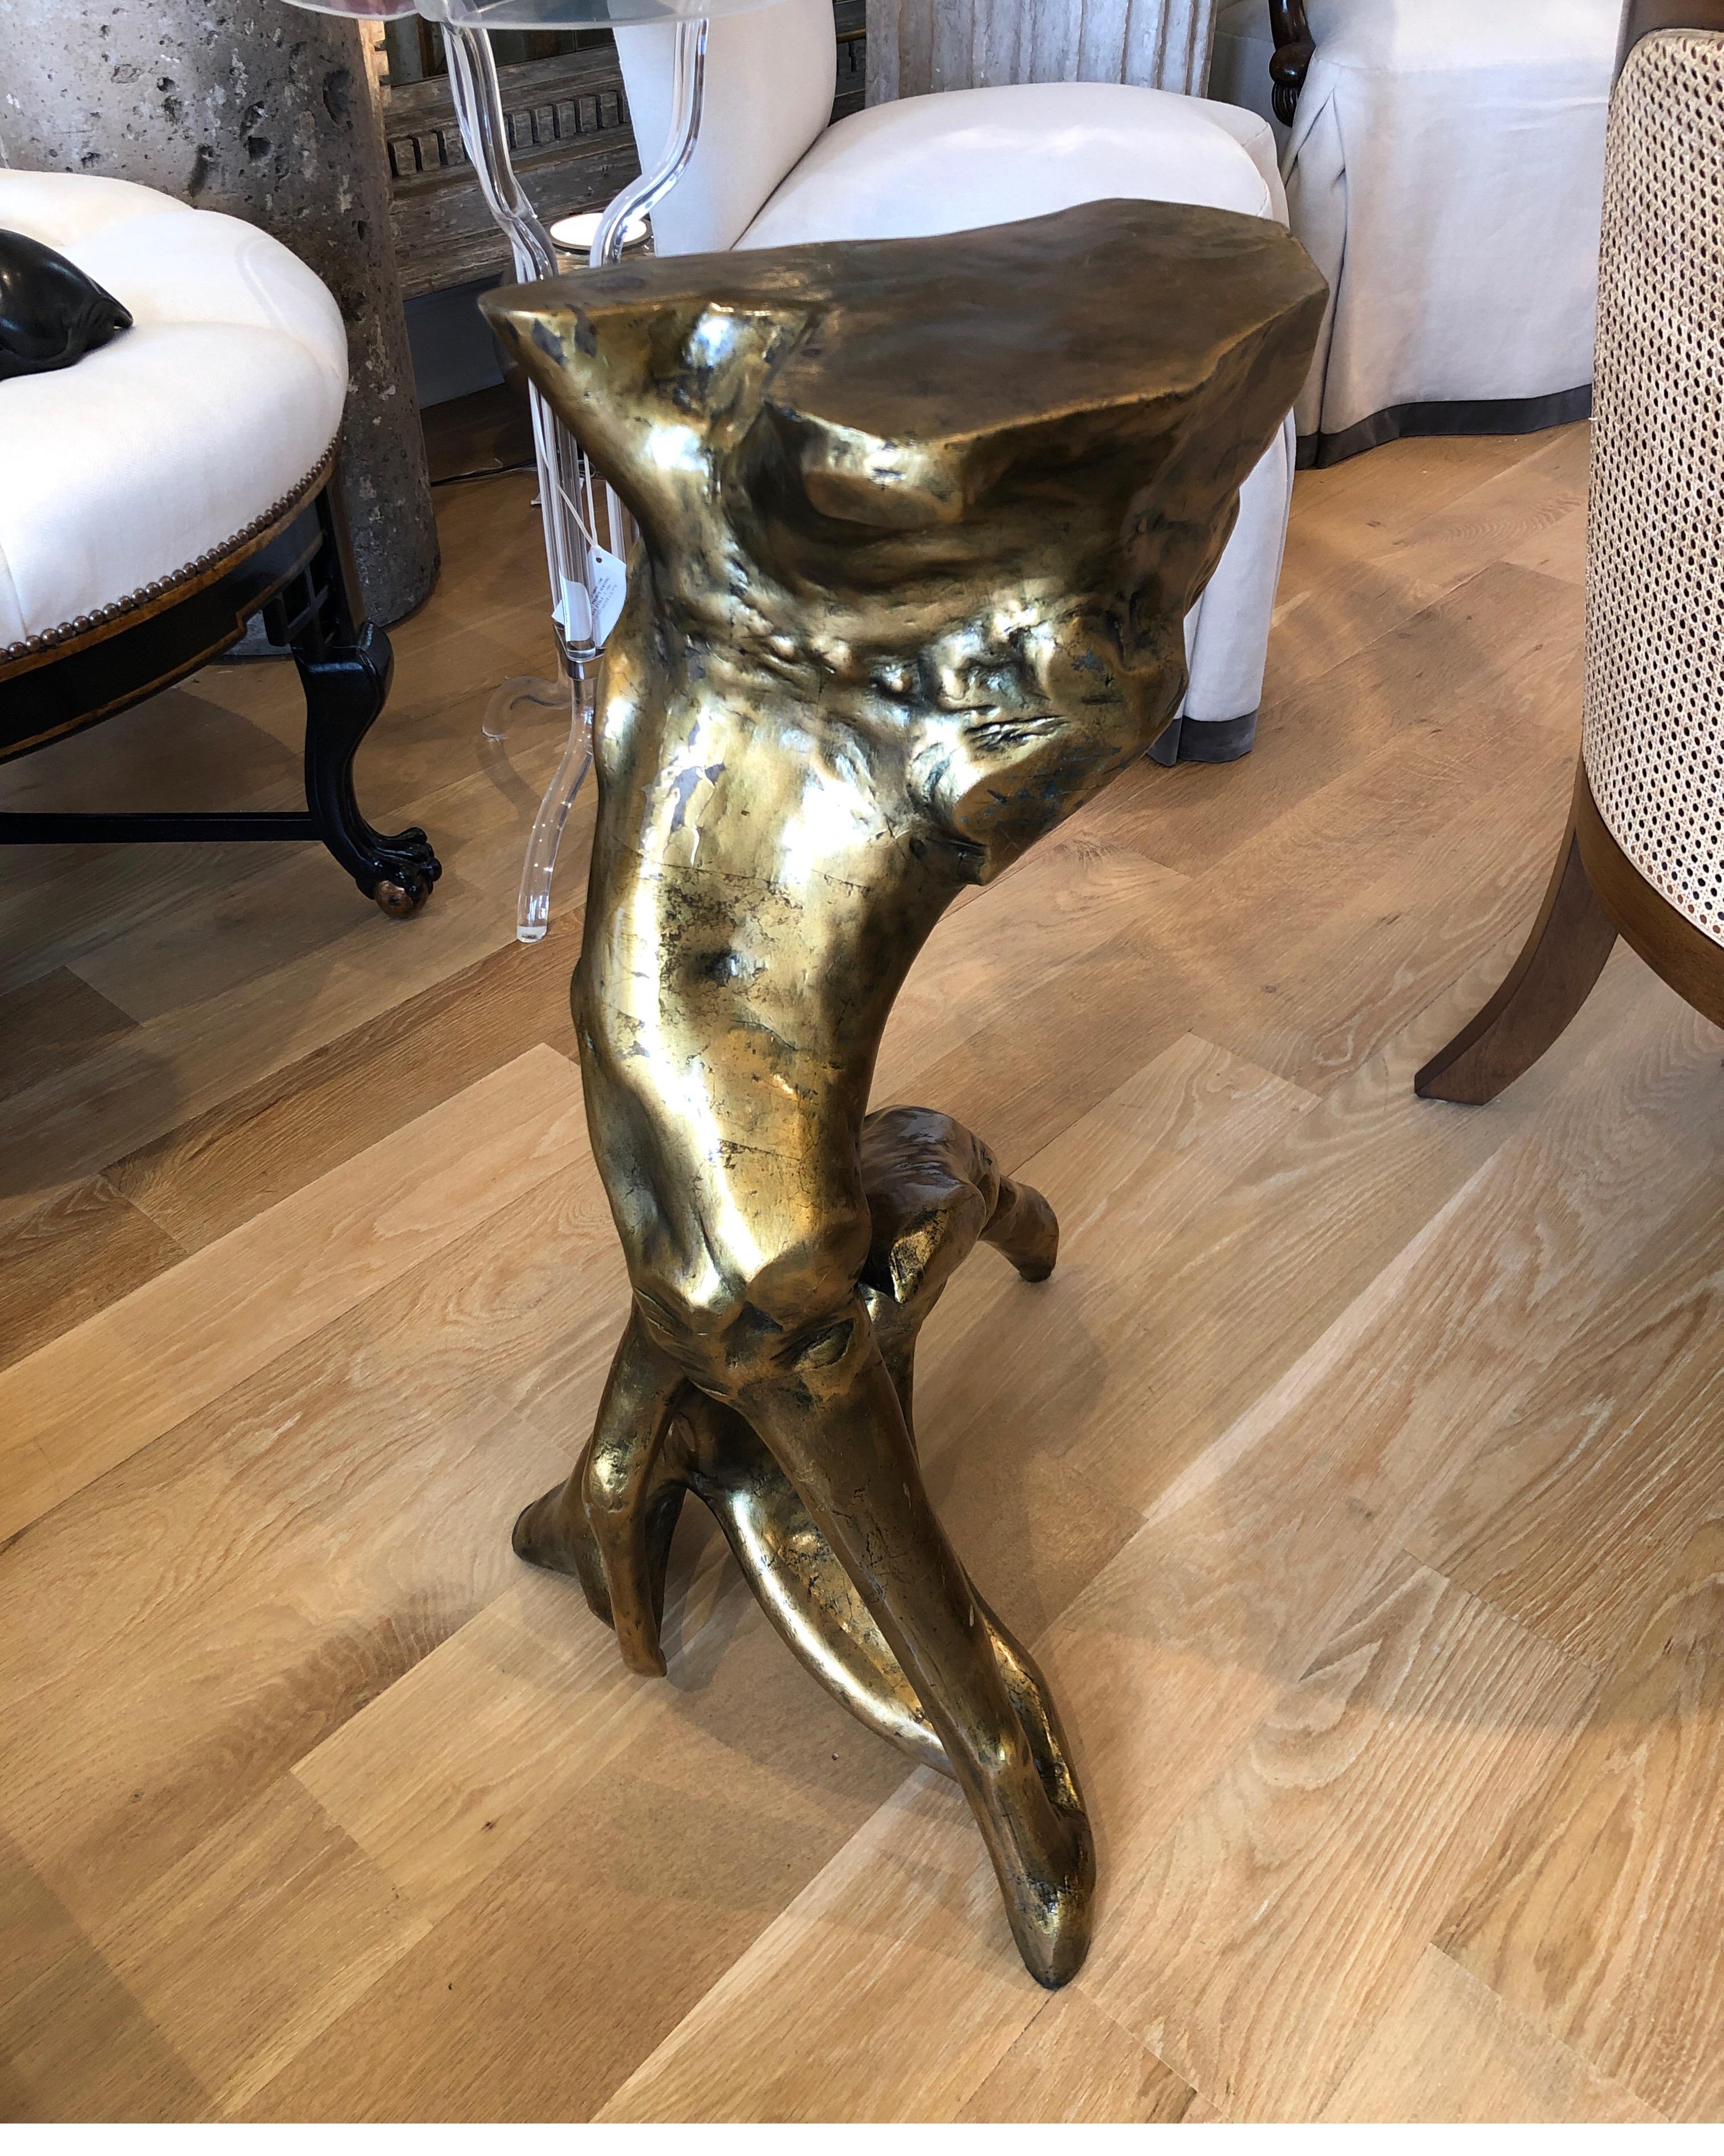 Unique large size gold tree root side table/bench.
Finished in lacquered gold gild. Solid and sturdy.

Measures 30